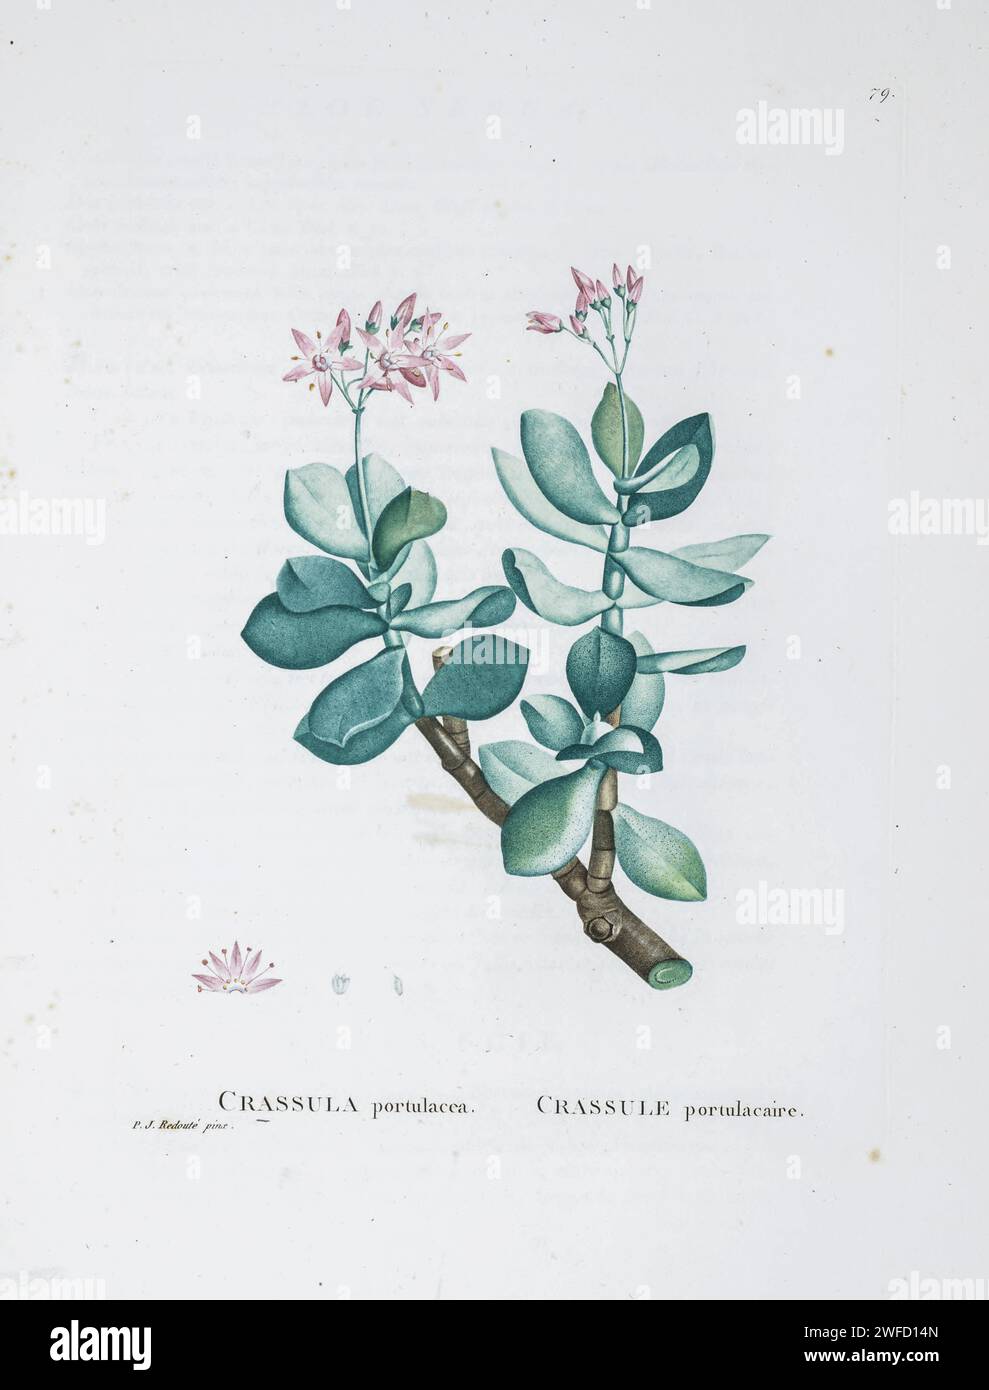 Crassula argentea Here As Crassula portulacea from History of Succulent Plants [Plantarum historia succulentarum / Histoire des plantes grasses] painted by Pierre-Joseph Redouté and described by Augustin Pyramus de Candolle 1799 Crassula ovata, commonly known as jade plant, lucky plant, money plant or money tree, is a succulent plant with small pink or white flowers that is native to the KwaZulu-Natal and Eastern Cape provinces of South Africa, and Mozambique; it is common as a houseplant worldwide Stock Photo